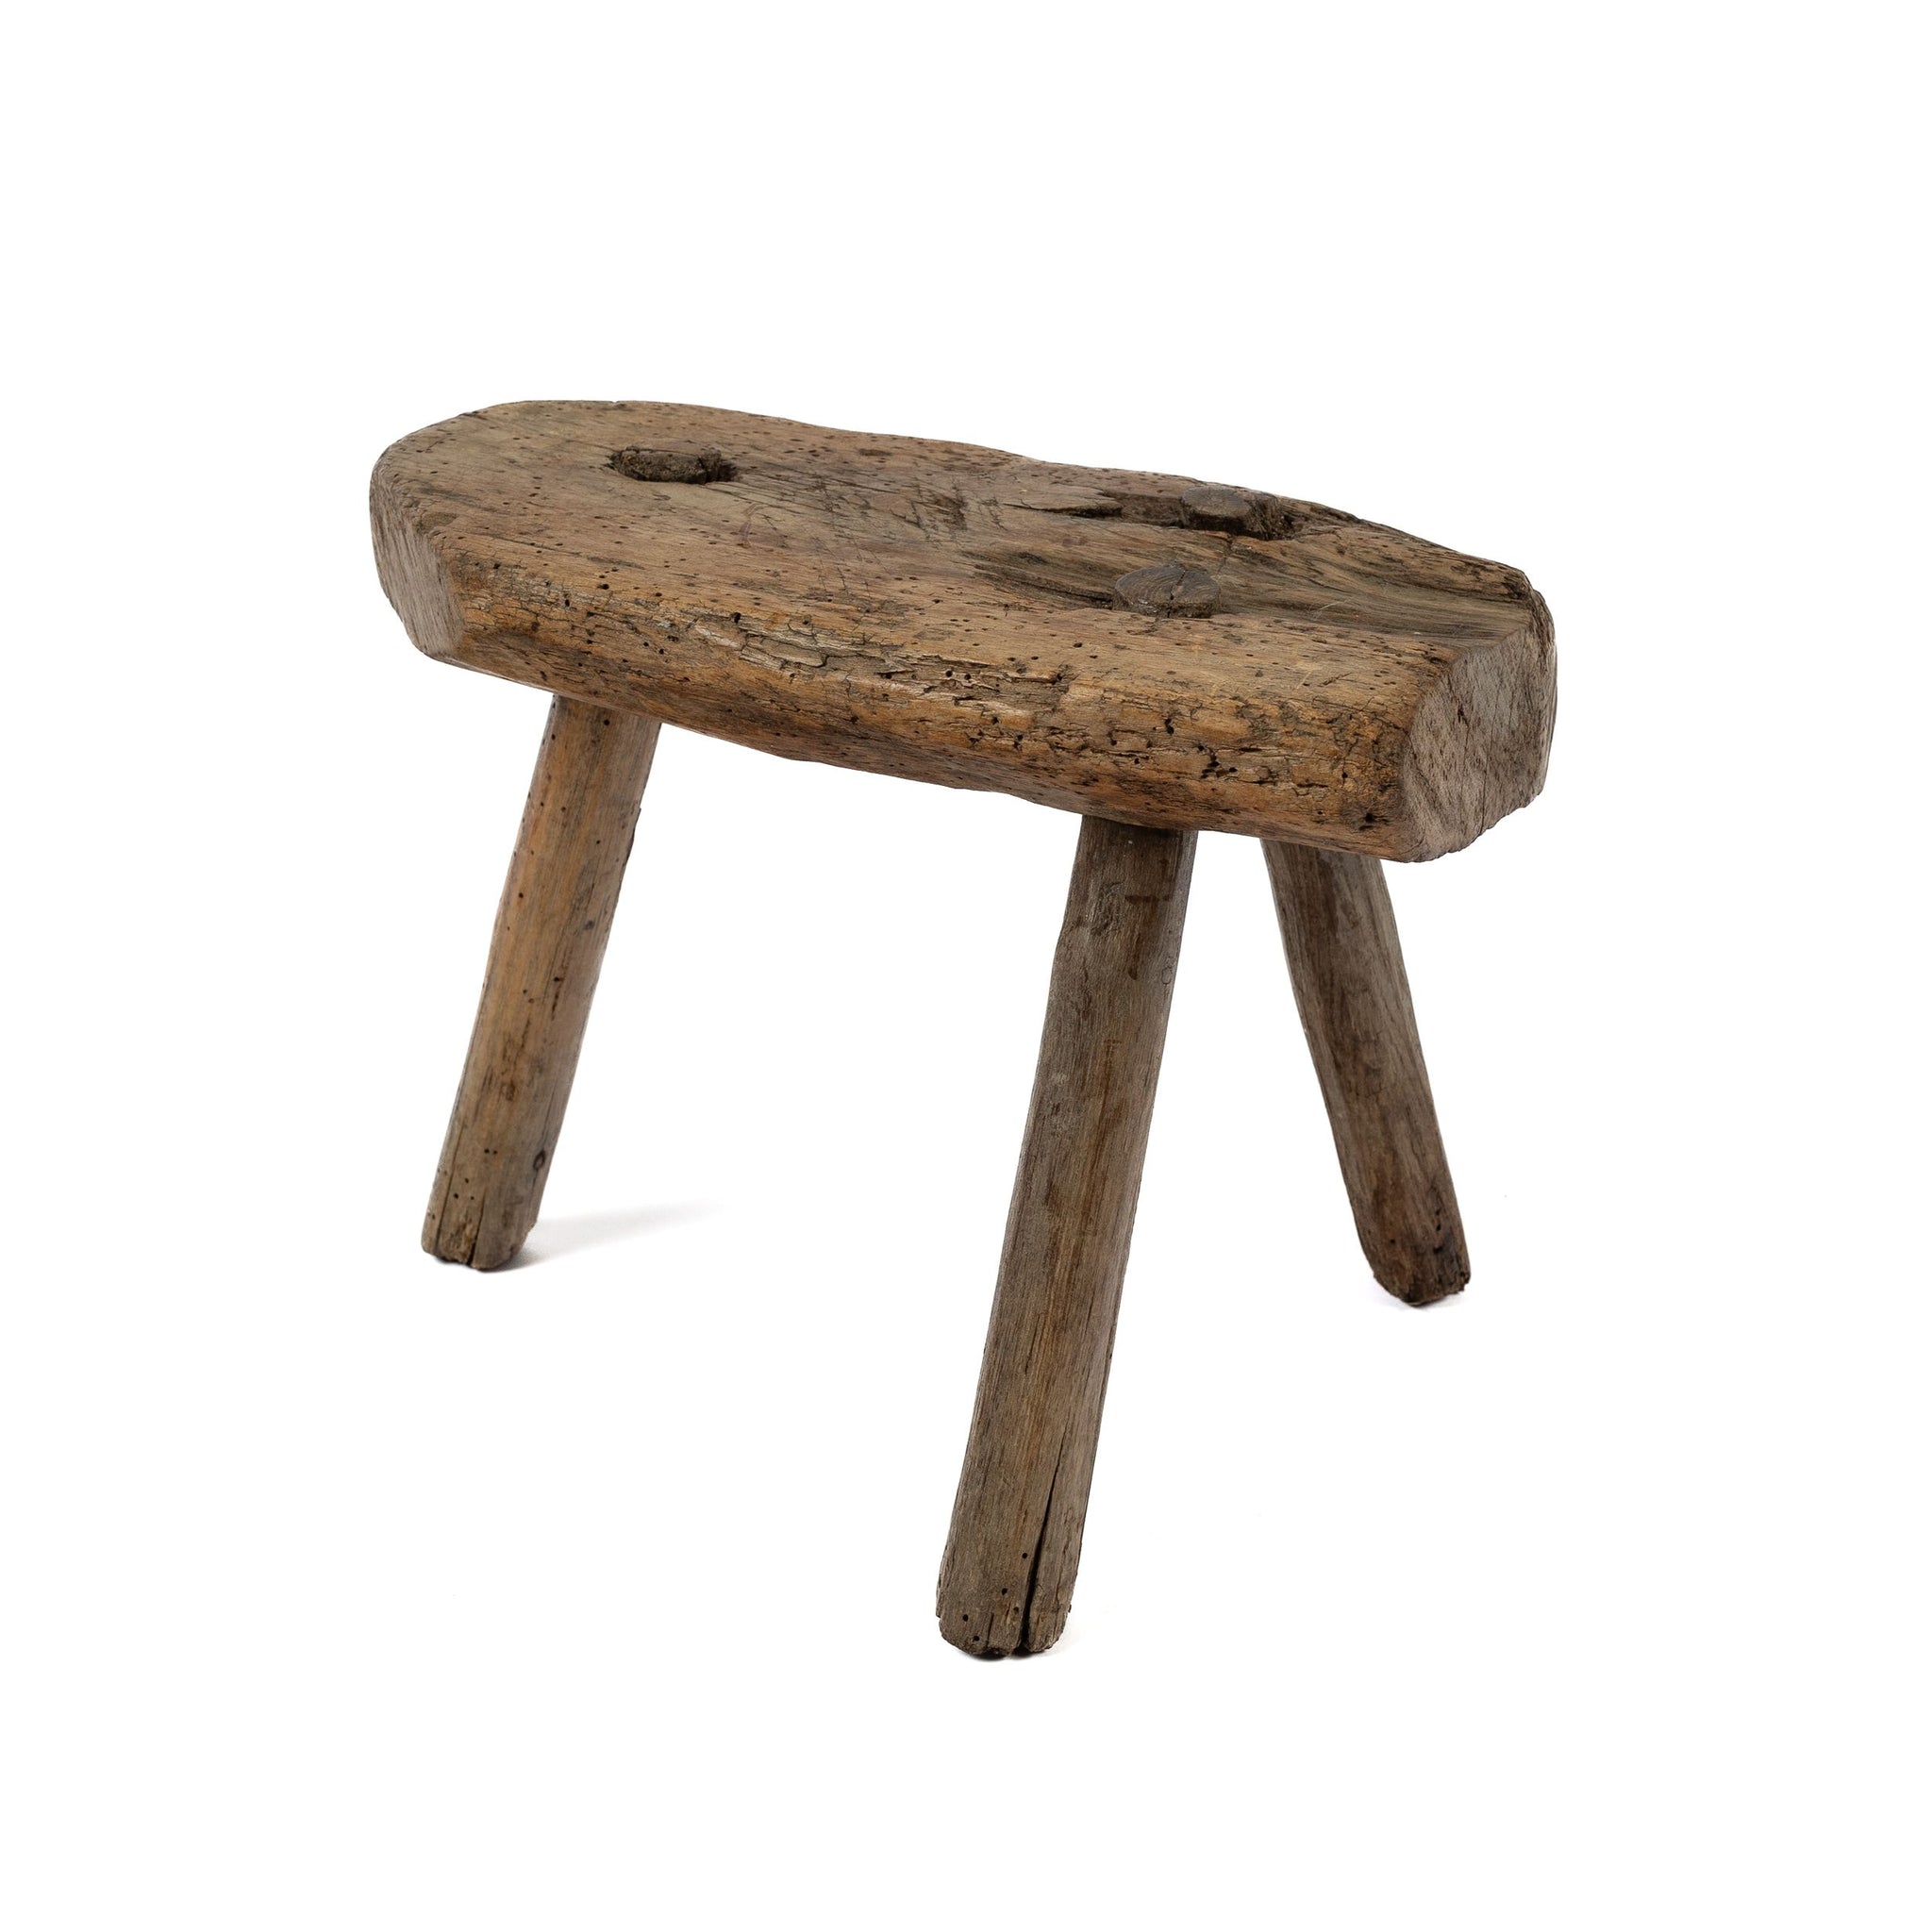 Gorgeous vintage French rustic stool hand made in The French Alps.